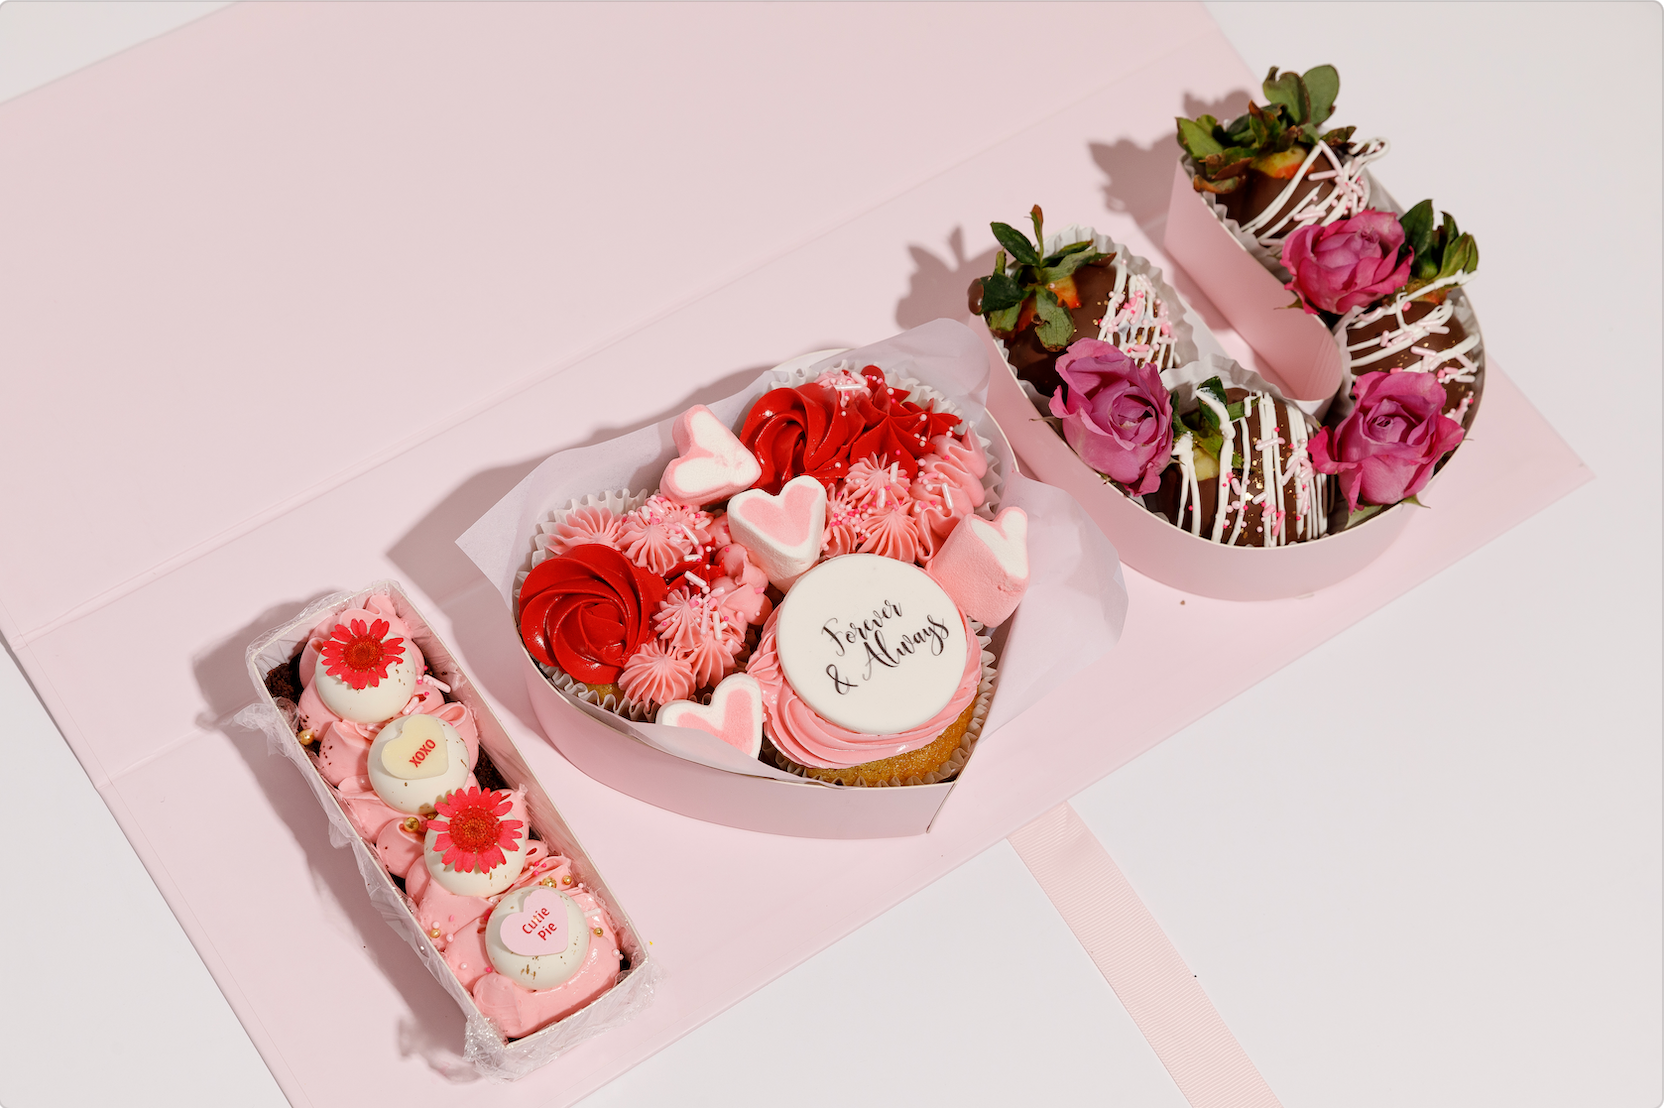 The I LOVE YOU Box (Pickup or Local Delivery only)